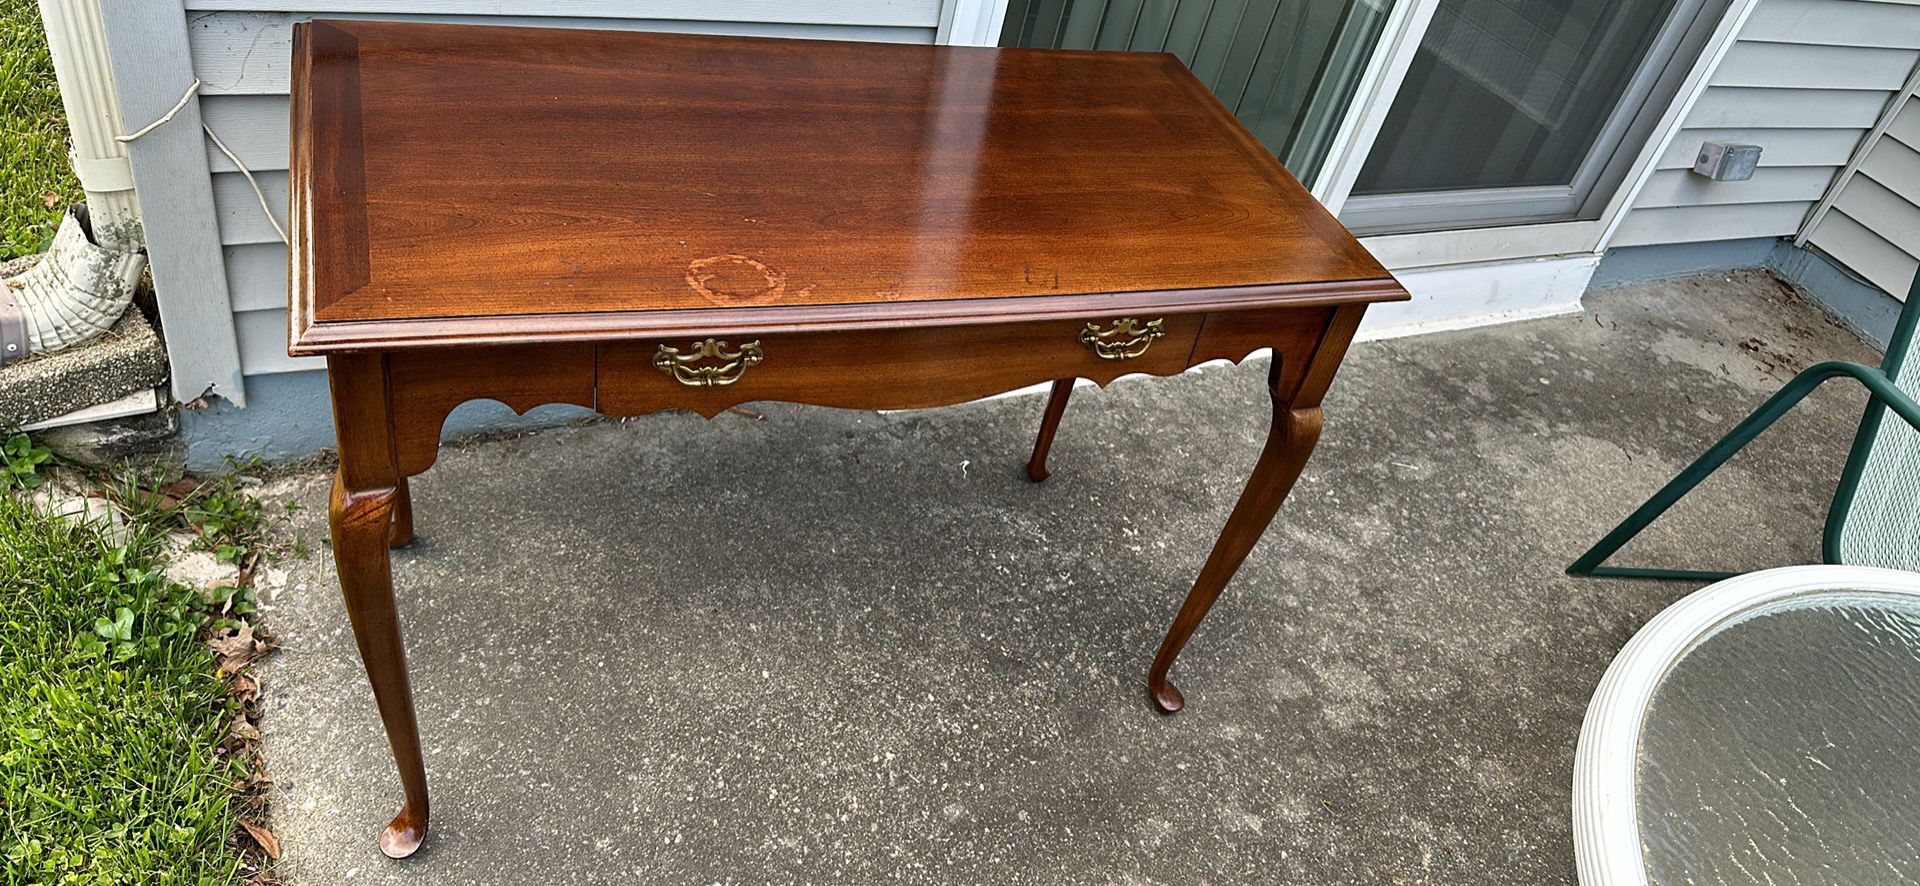 Antique console table one draw “Lane “ brand